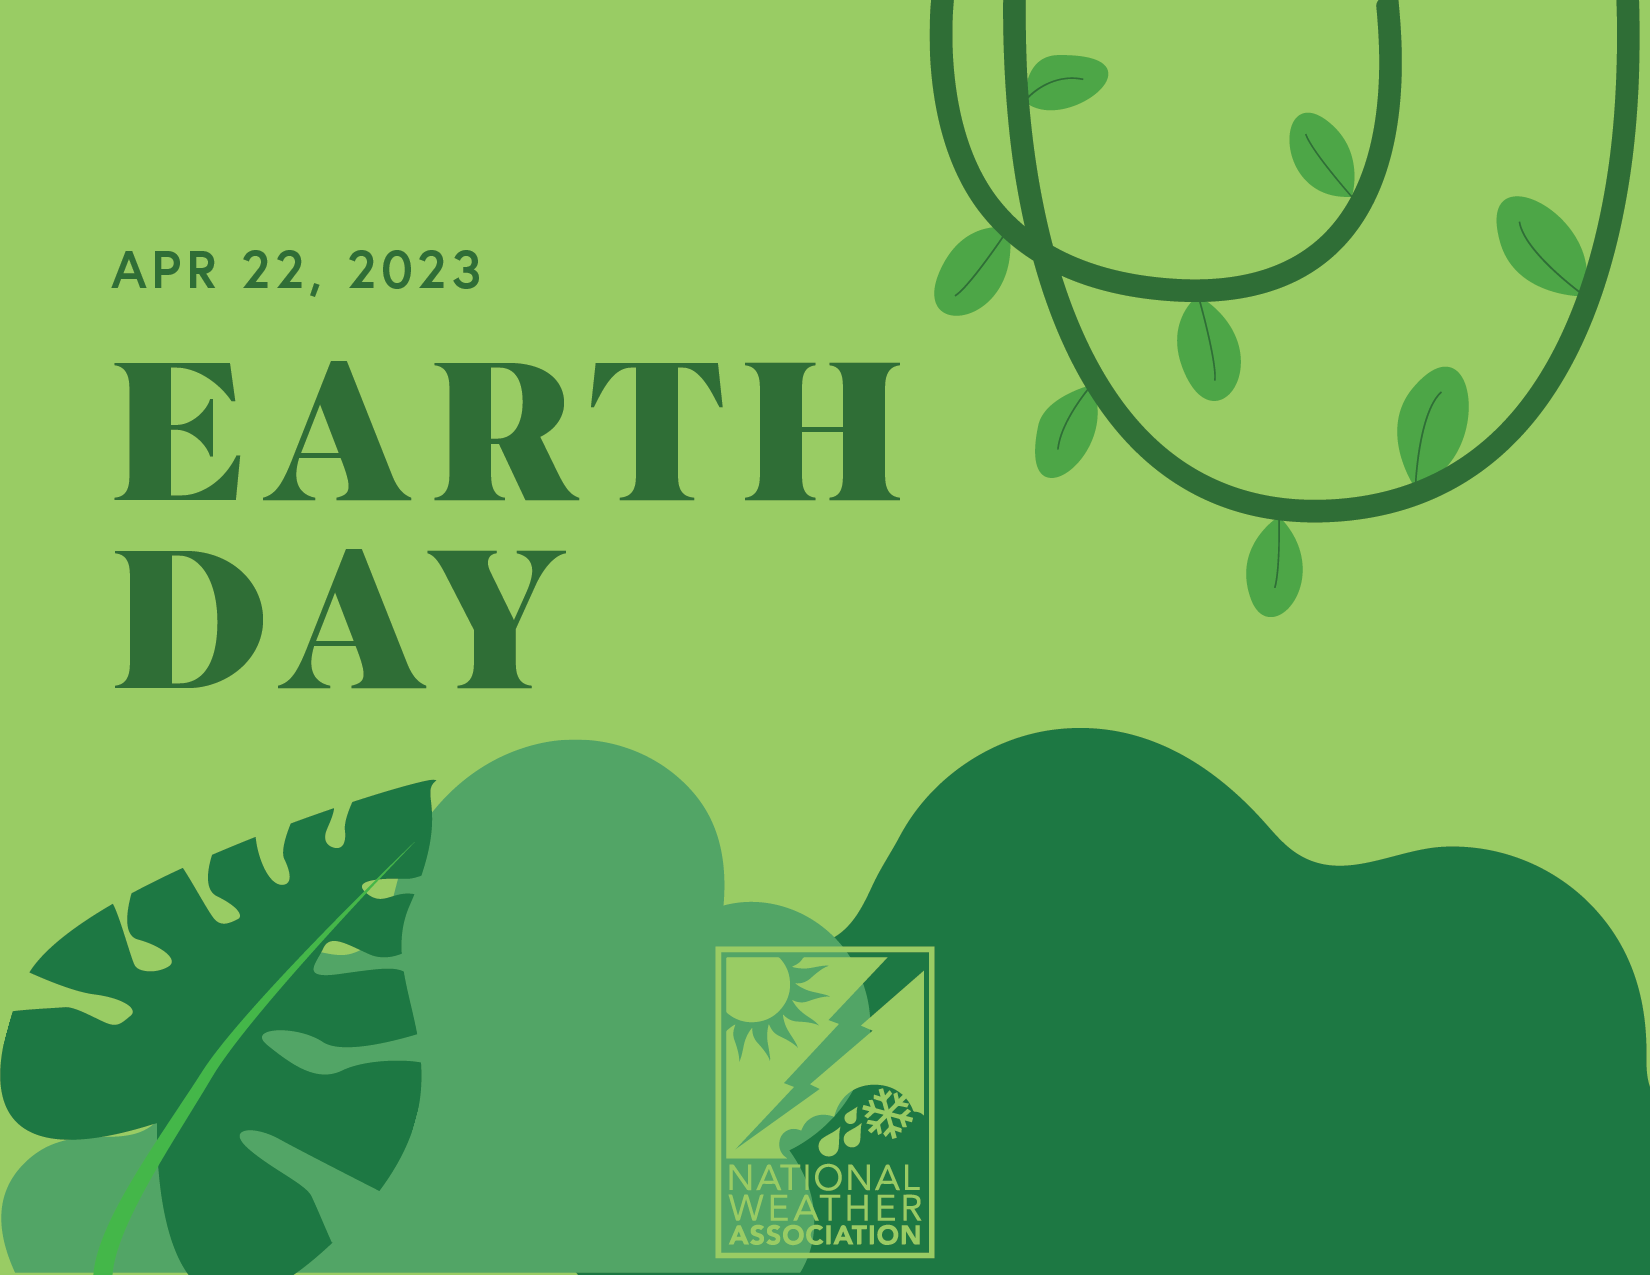 April 22 2023 is Earth Day Graphic.